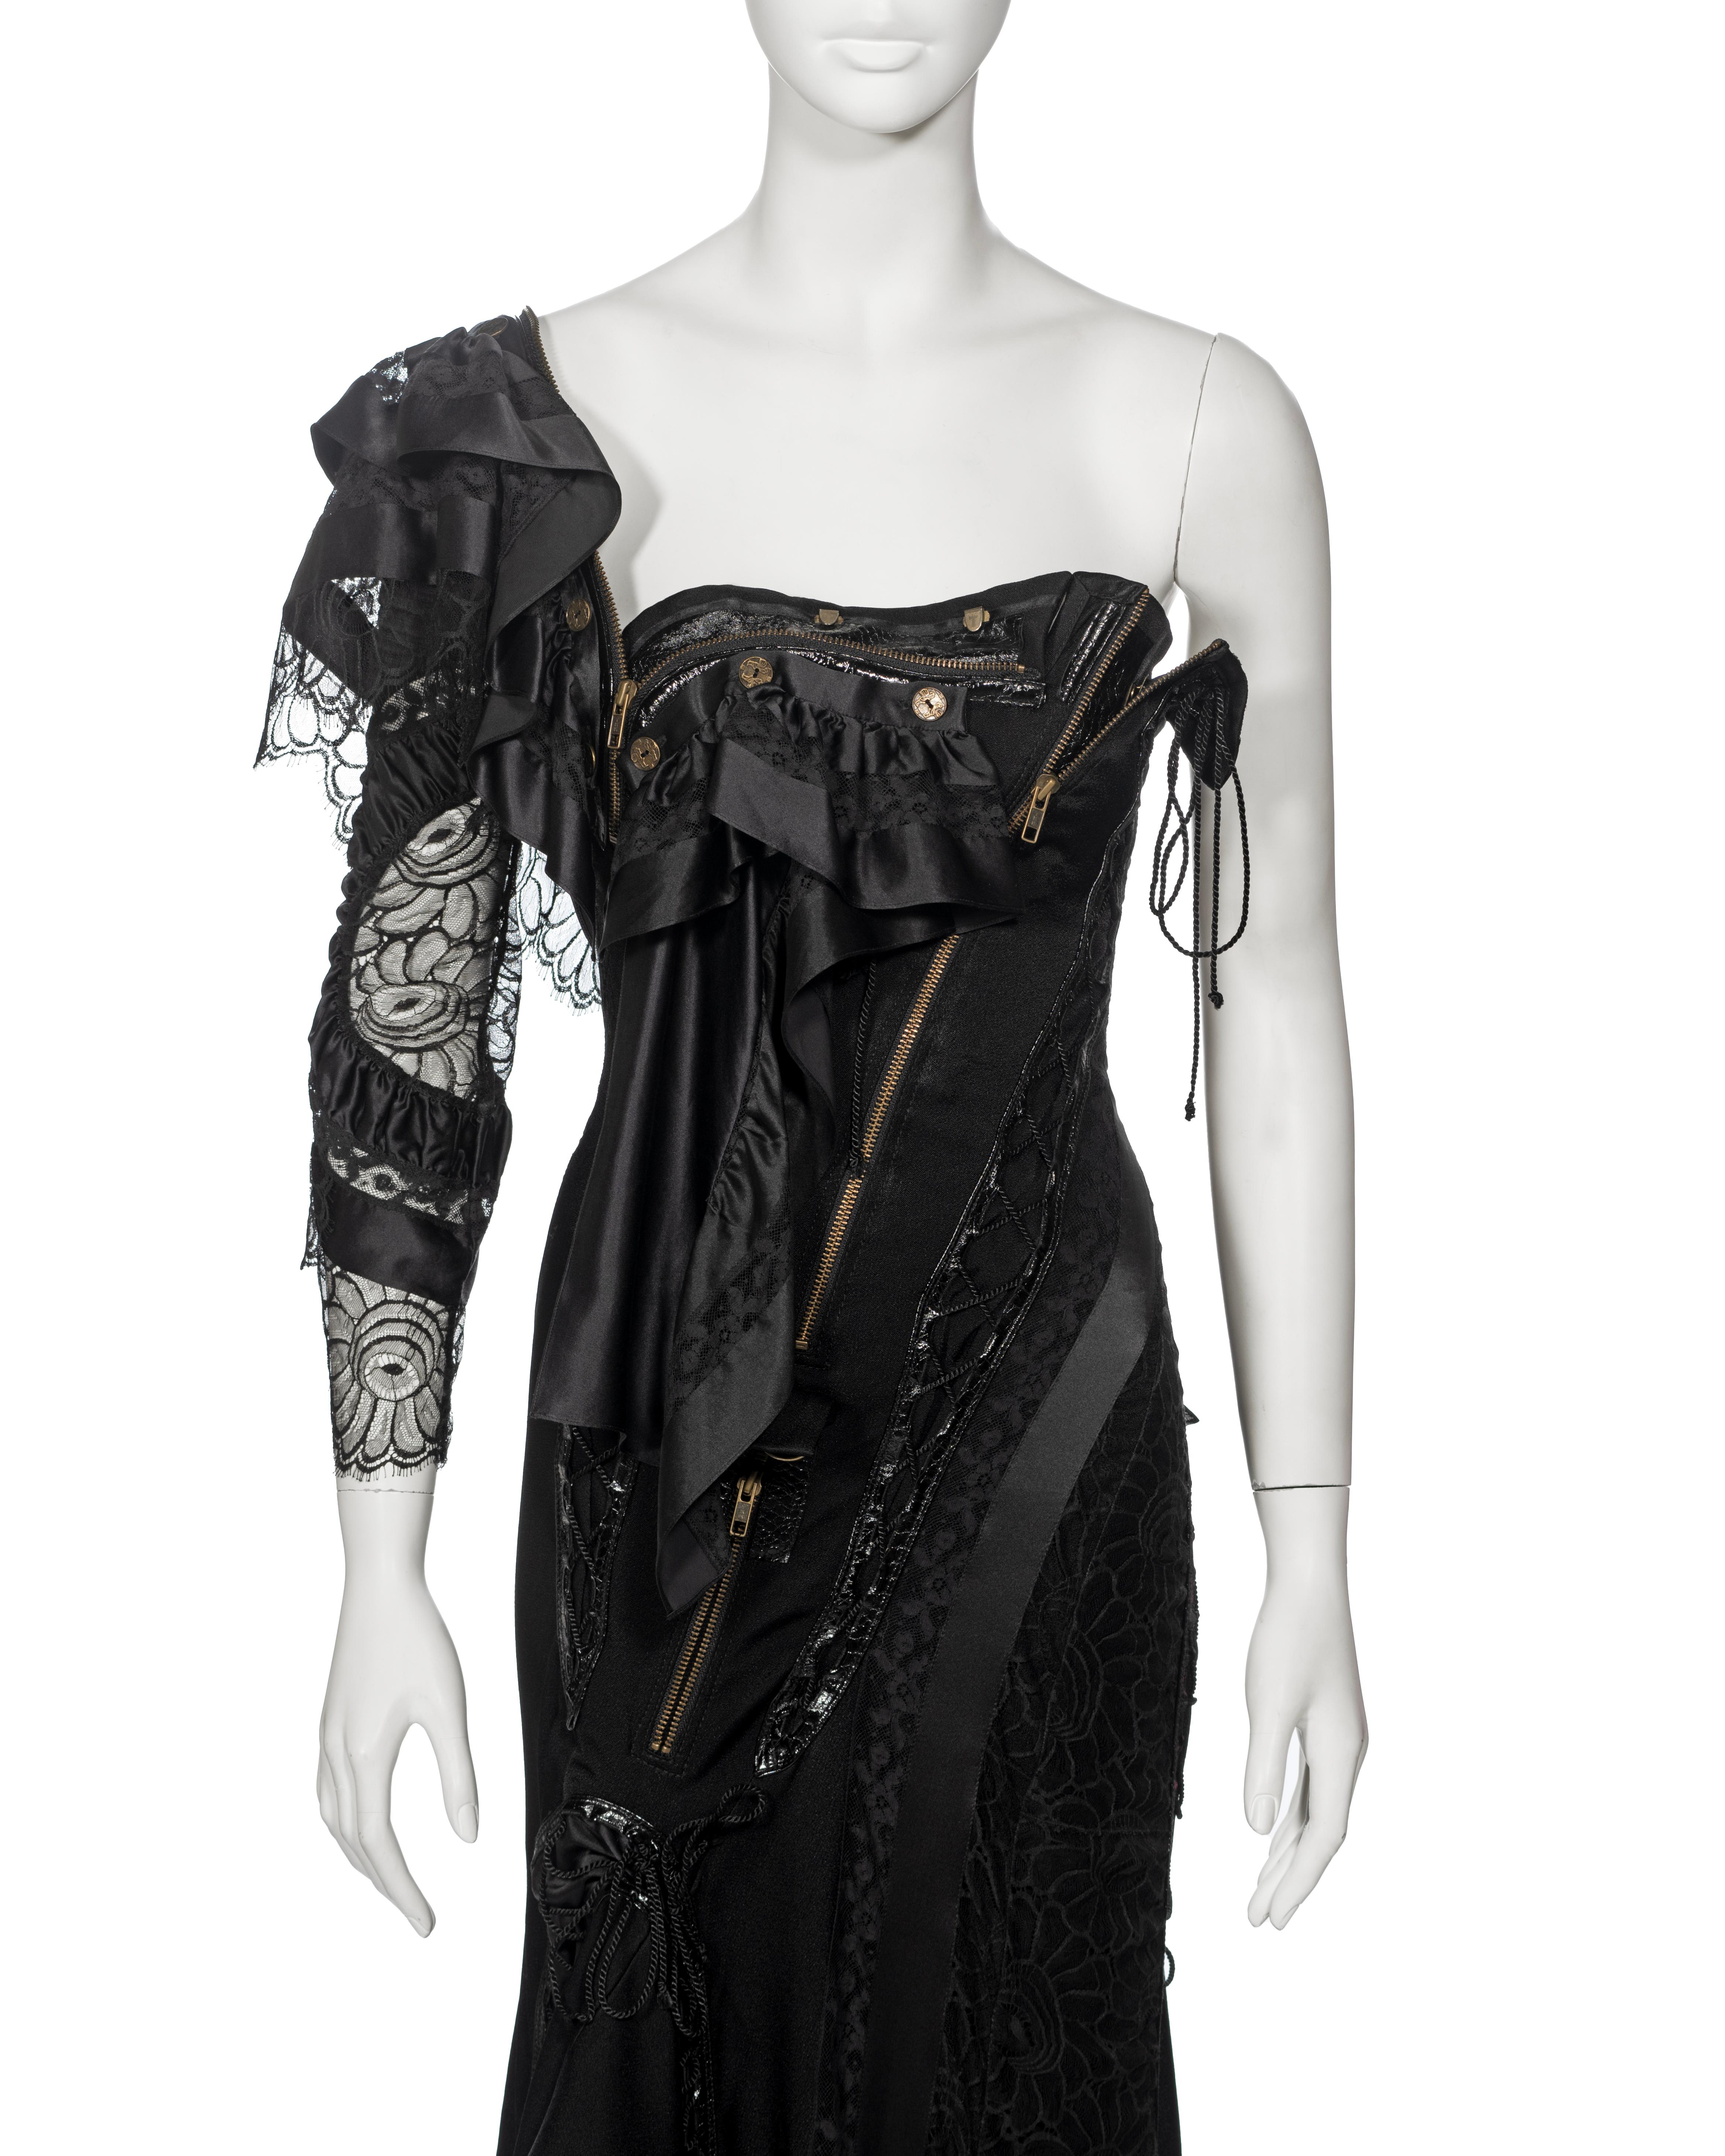 Women's John Galliano Black Deconstructed Silk and Lace Evening Dress, ss 2002 For Sale